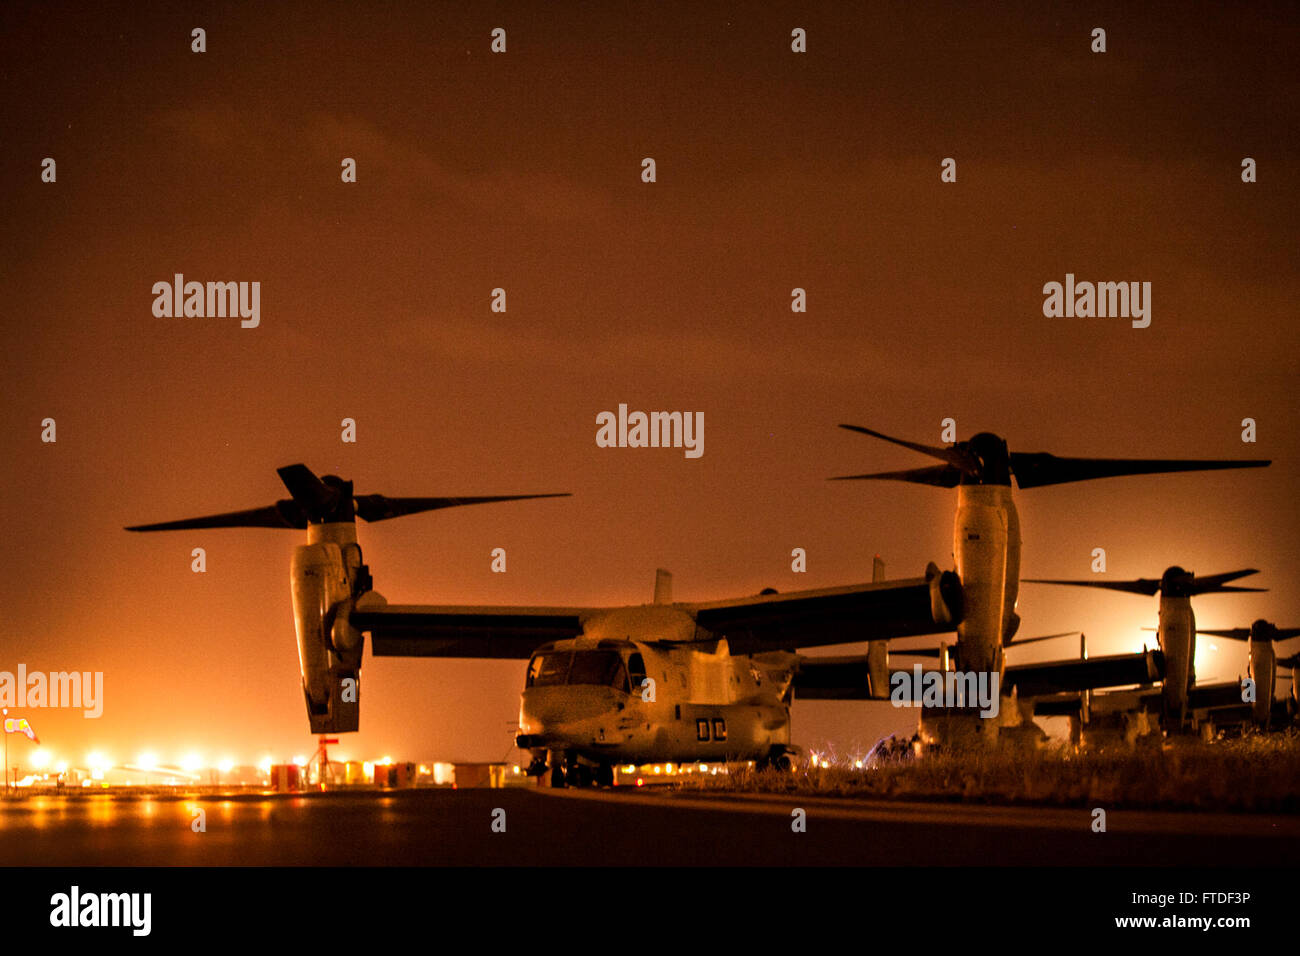 150724-M-JT438-042 NAIROBI, Kenya (July 25, 2015) MV-22B Ospreys with the “Greyhawks” of Marine Medium Tiltrotor Squadron 161 (Reinforced), 15th Marine Expeditionary Unit (MEU), stage at Jomo Kenyatta International Airport during President Barack Obama’s visit to Nairobi July 25, 2015. Elements of the 15th MEU, based out of Camp Pendleton, California, and embarked aboard the Essex, are conducting naval operations in the 6th Fleet areas of operation in support of U.S. national security interests in Europe and Africa. (U.S. Marine Corps photo by Cpl. Elize McKelvey/Released) Stock Photo